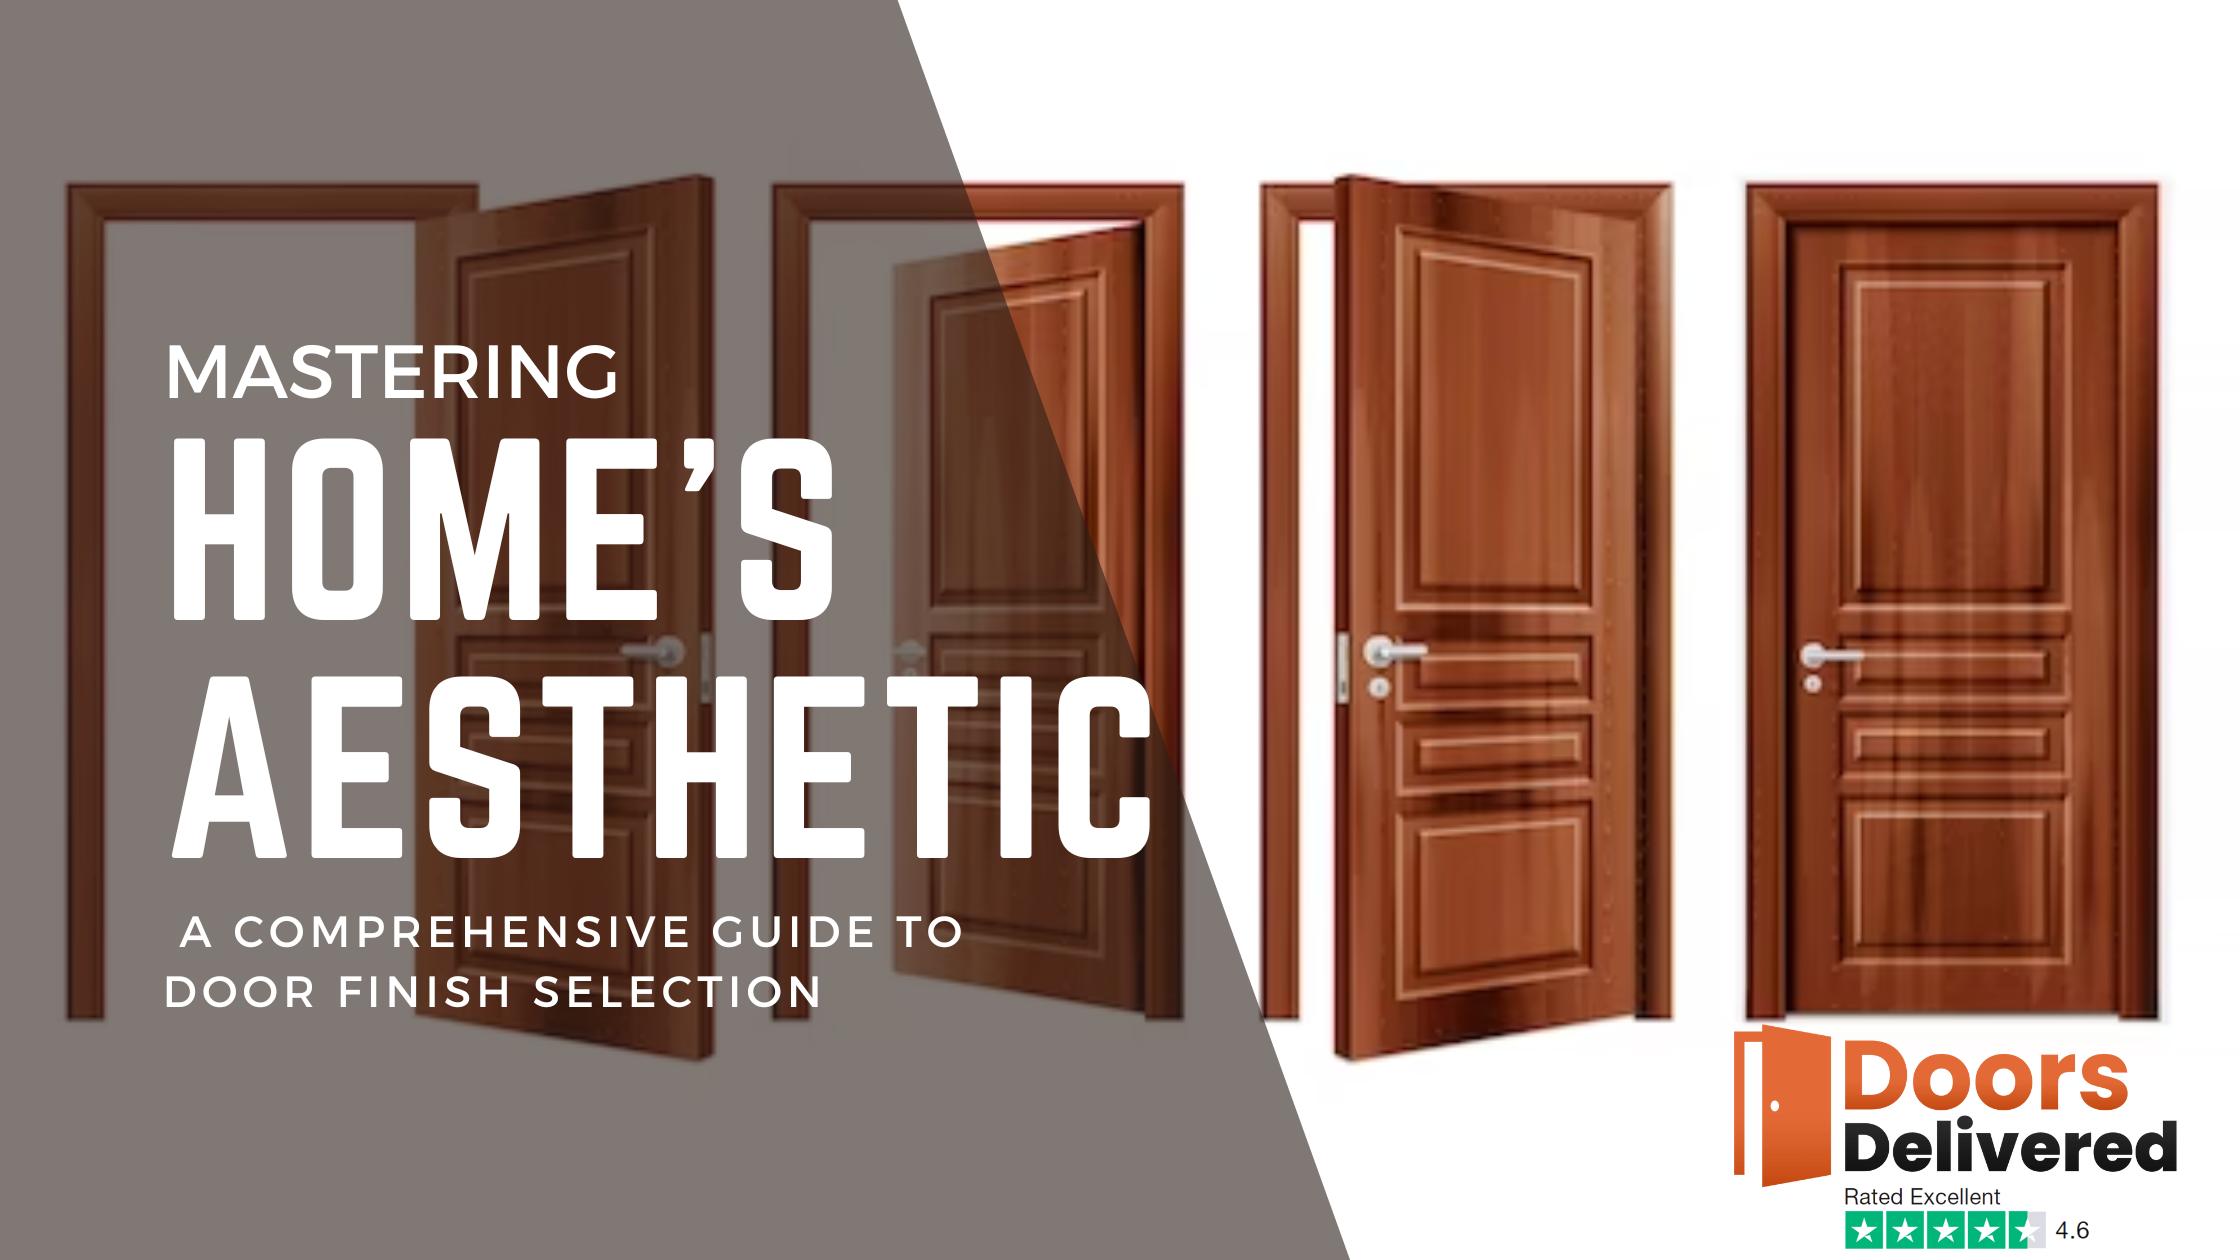 A guide for door selection